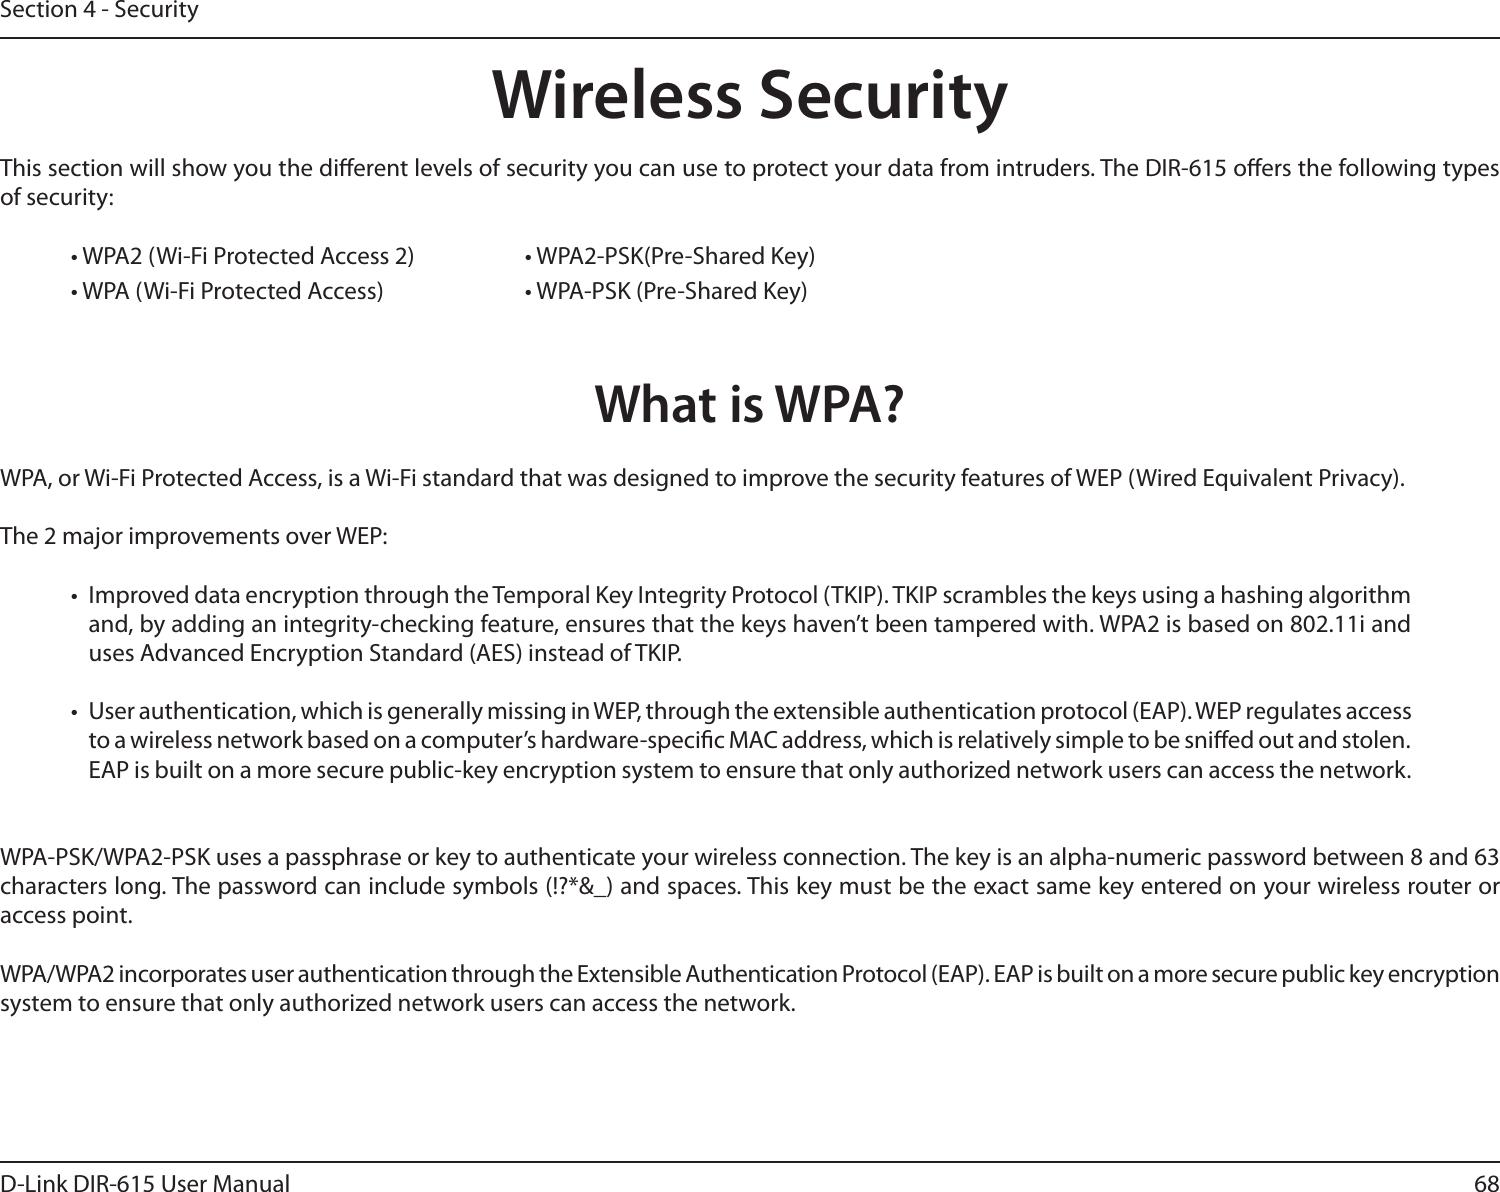 68D-Link DIR-615 User ManualSection 4 - SecurityWireless SecurityThis section will show you the dierent levels of security you can use to protect your data from intruders. The DIR-615 oers the following types of security:• WPA2 (Wi-Fi Protected Access 2)     • WPA2-PSK(Pre-Shared Key)• WPA (Wi-Fi Protected Access)    • WPA-PSK (Pre-Shared Key)What is WPA?WPA, or Wi-Fi Protected Access, is a Wi-Fi standard that was designed to improve the security features of WEP (Wired Equivalent Privacy).  The 2 major improvements over WEP: •  Improved data encryption through the Temporal Key Integrity Protocol (TKIP). TKIP scrambles the keys using a hashing algorithm and, by adding an integrity-checking feature, ensures that the keys haven’t been tampered with. WPA2 is based on 802.11i and uses Advanced Encryption Standard (AES) instead of TKIP.•  User authentication, which is generally missing in WEP, through the extensible authentication protocol (EAP). WEP regulates access to a wireless network based on a computer’s hardware-specic MAC address, which is relatively simple to be snied out and stolen. EAP is built on a more secure public-key encryption system to ensure that only authorized network users can access the network.WPA-PSK/WPA2-PSK uses a passphrase or key to authenticate your wireless connection. The key is an alpha-numeric password between 8 and 63 characters long. The password can include symbols (!?*&amp;_) and spaces. This key must be the exact same key entered on your wireless router or access point.WPA/WPA2 incorporates user authentication through the Extensible Authentication Protocol (EAP). EAP is built on a more secure public key encryption system to ensure that only authorized network users can access the network.